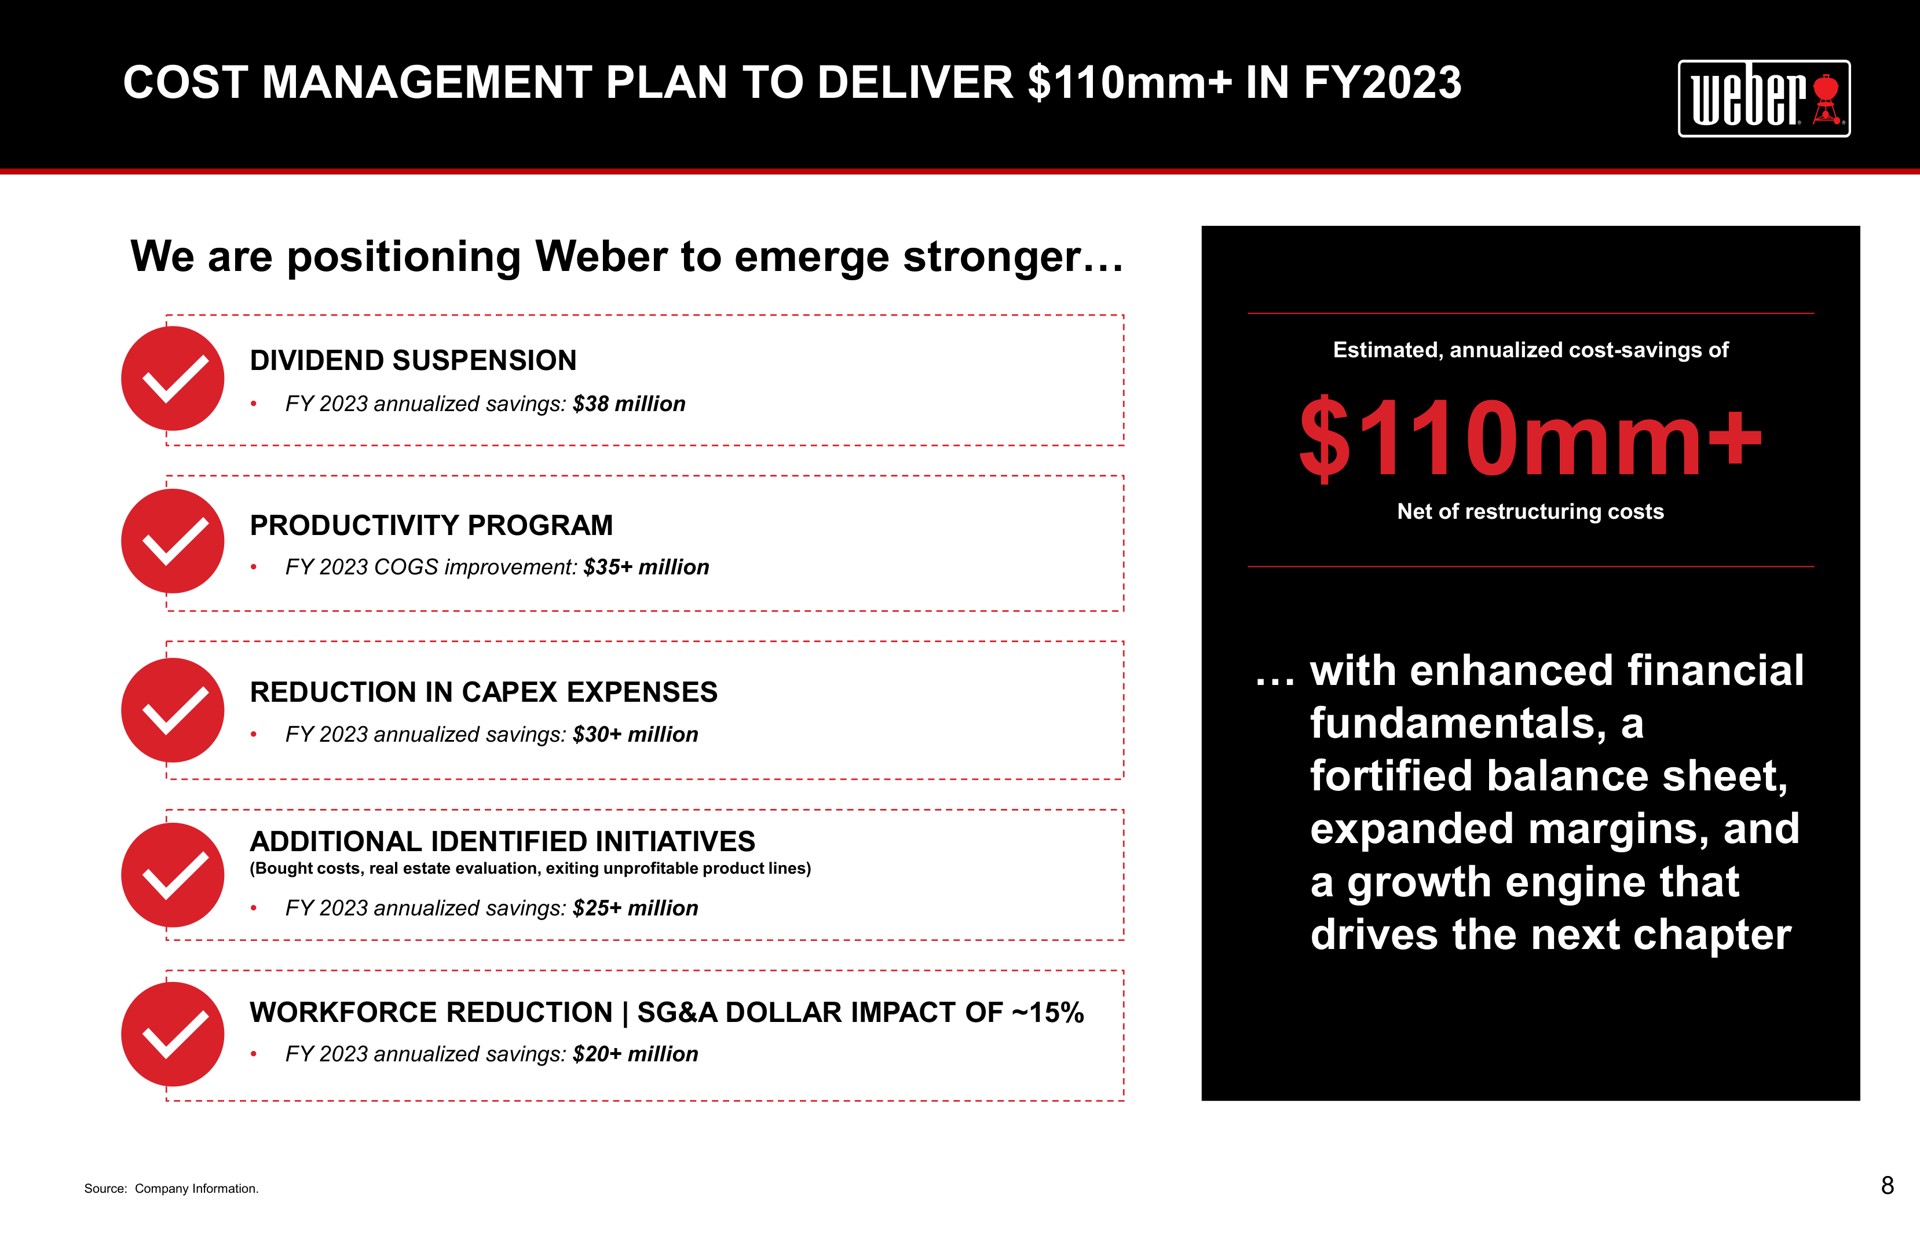 cost management plan to deliver in we are positioning weber to emerge with enhanced financial fundamentals a fortified balance sheet expanded margins and a growth engine that drives the next chapter additional identified initiatives | Weber